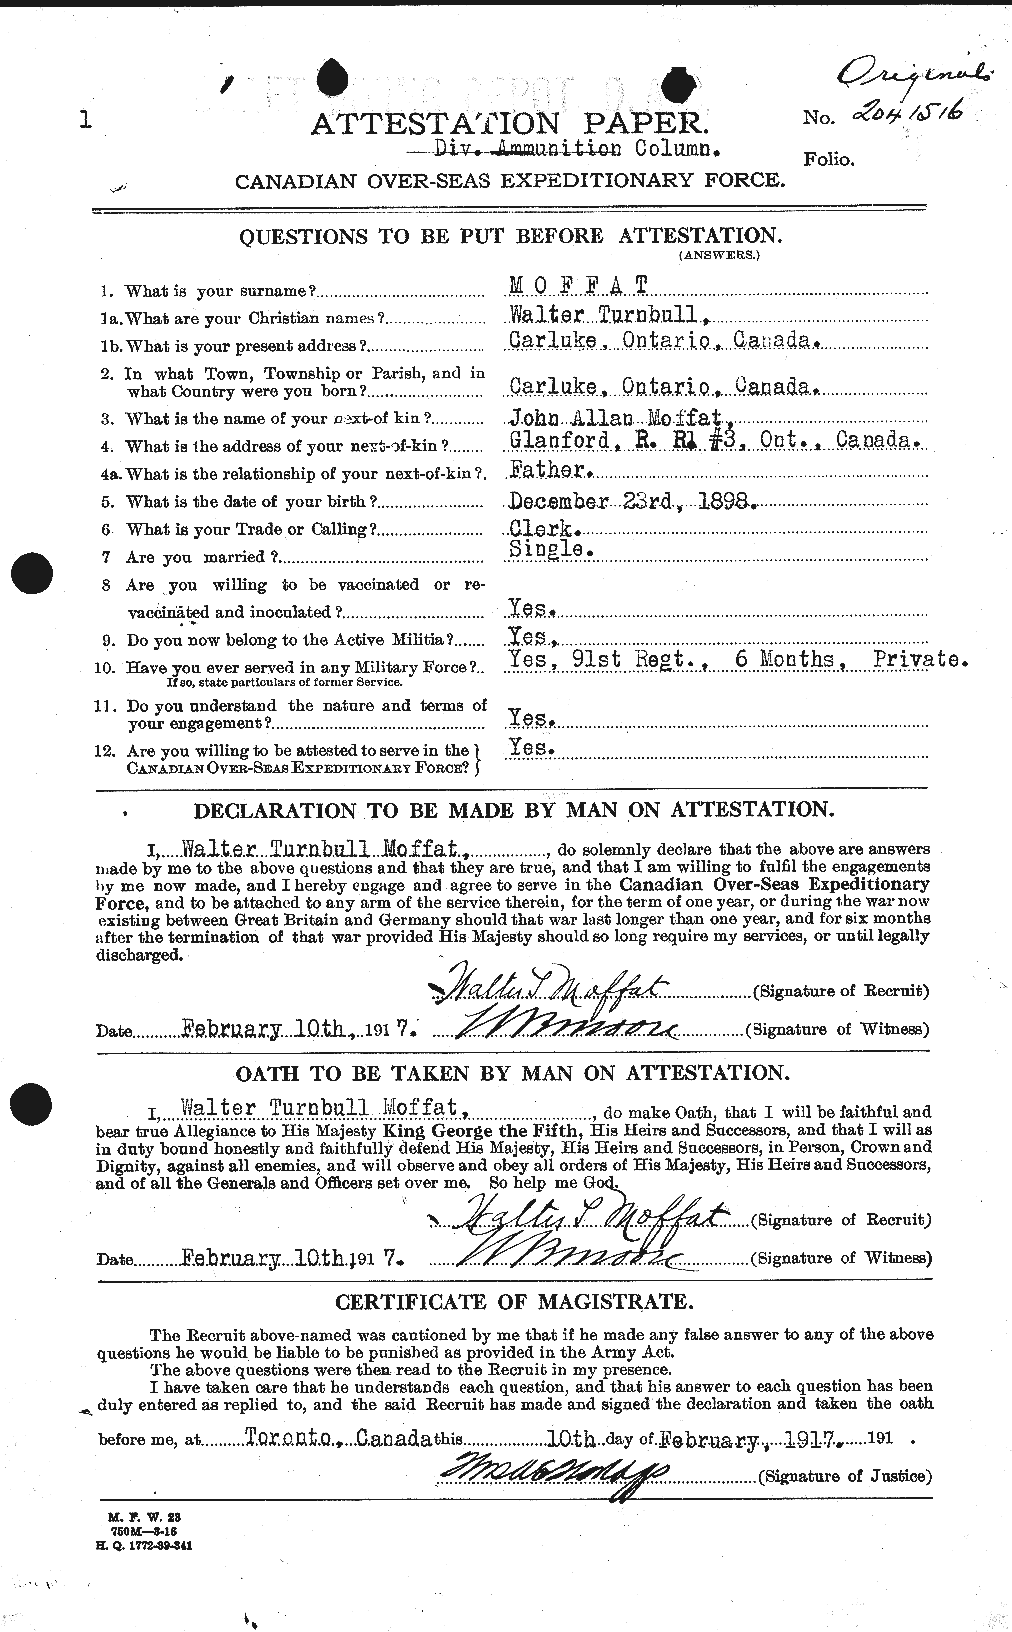 Personnel Records of the First World War - CEF 499085a